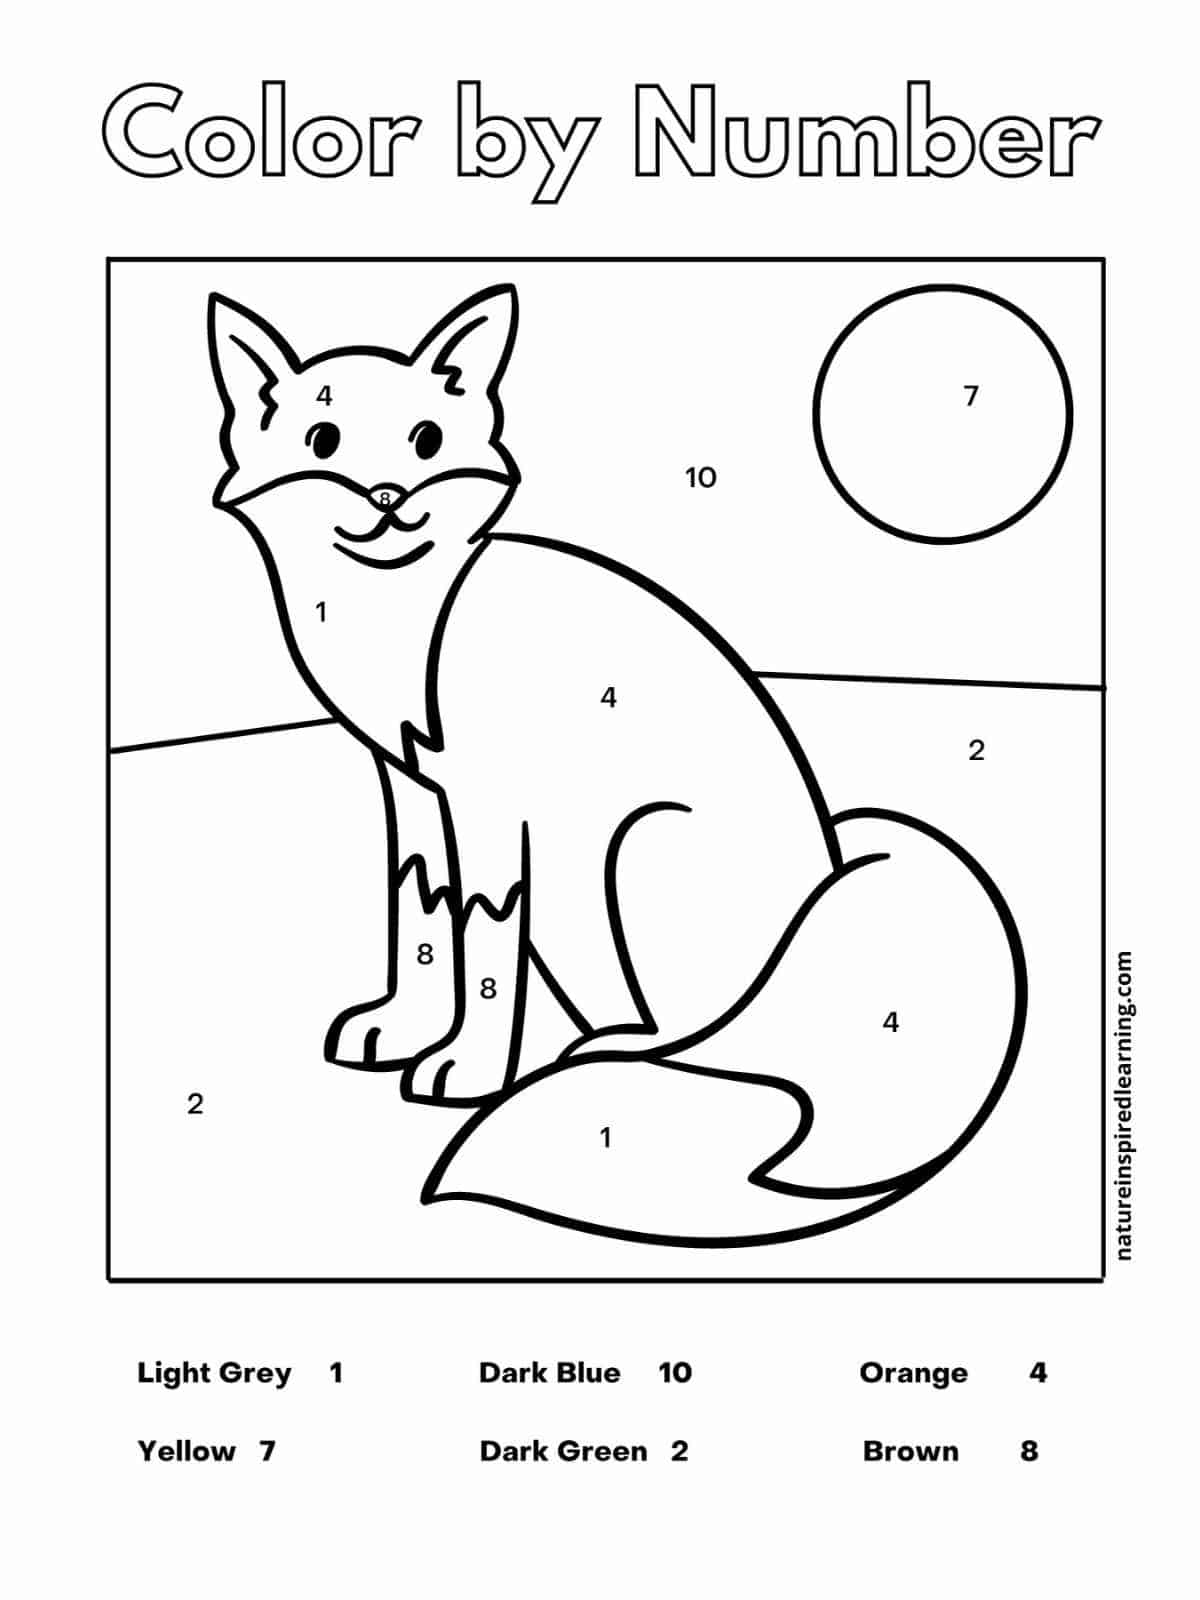 Black and white fox sitting in the open with a full moon numbers within the different parts of the image with a key across the bottom of the sheet. Color by Number written across the top in outline form.